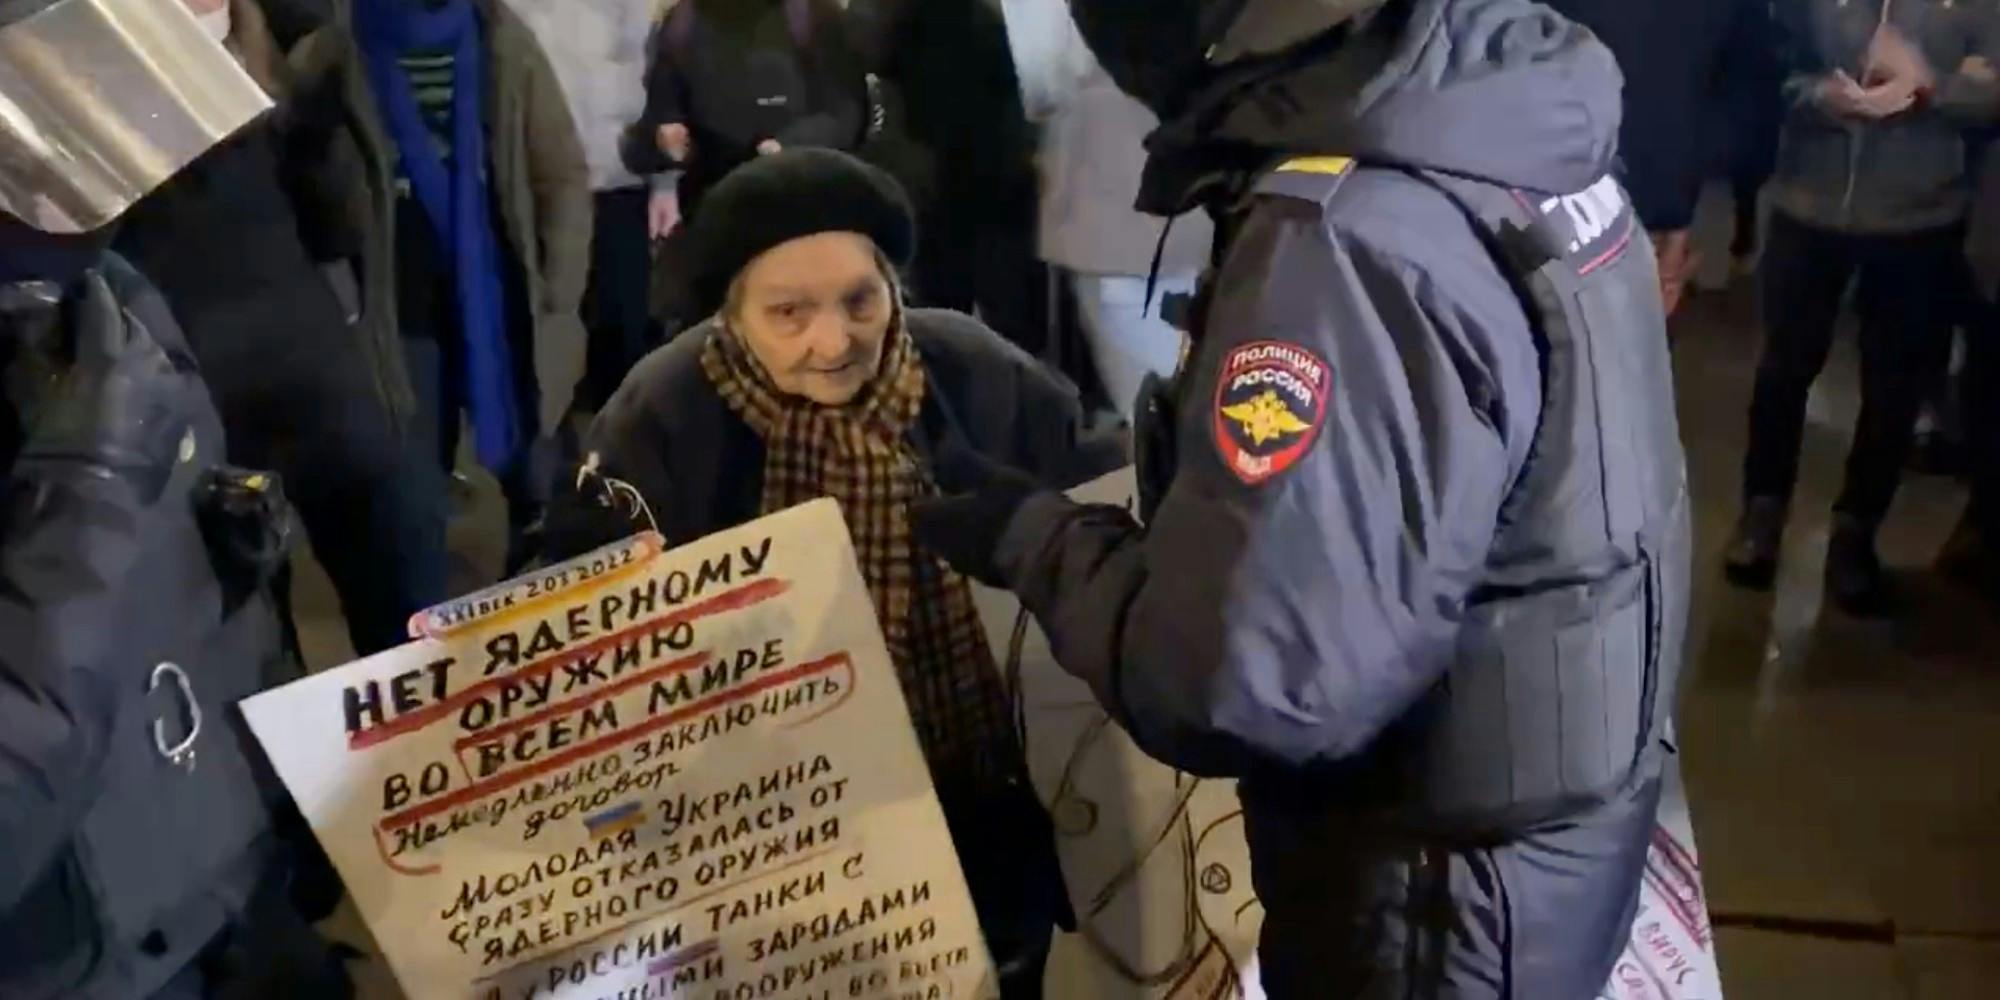 Siege of Leningrad Survivor & Russian Activist Yelena Osipova Charged With Anti-War Protest in Russia